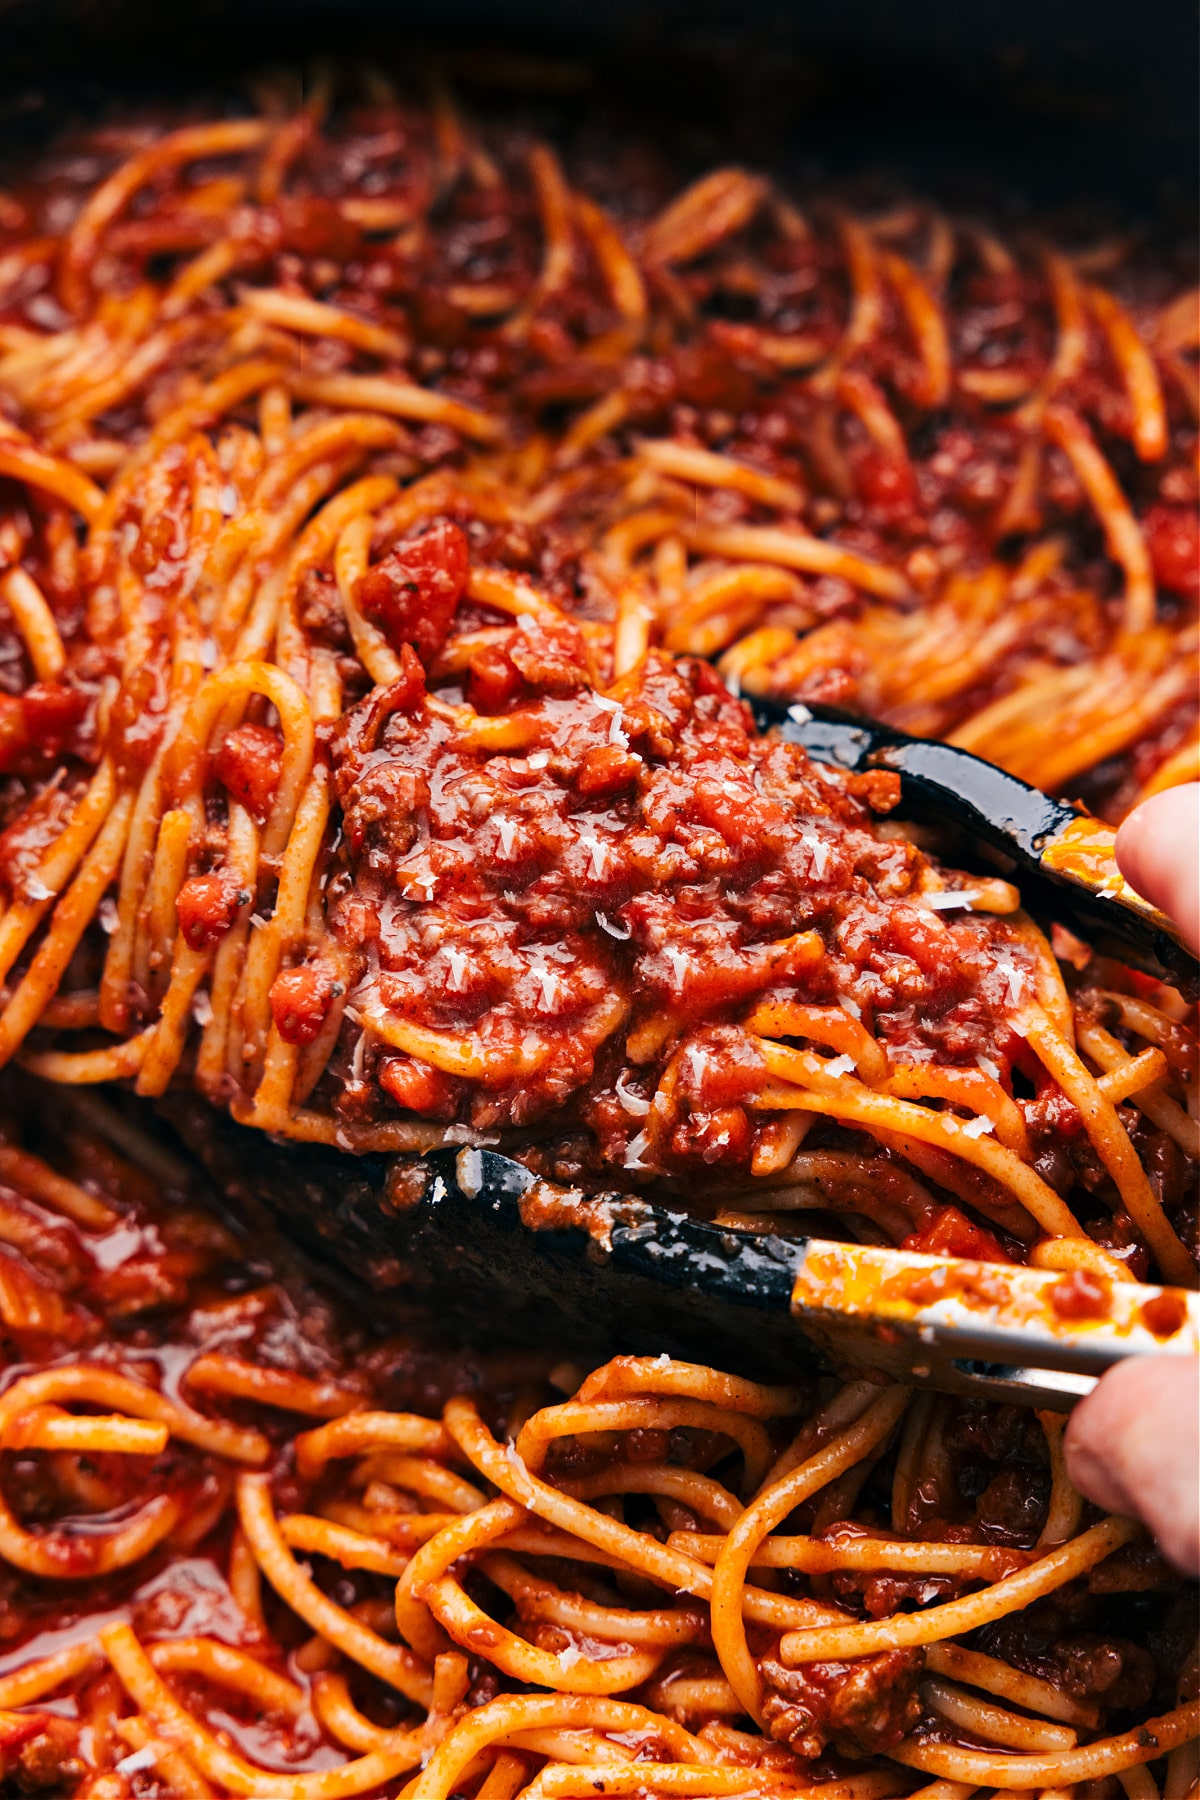 Spaghetti Bolognese with tongs scooping some up some.